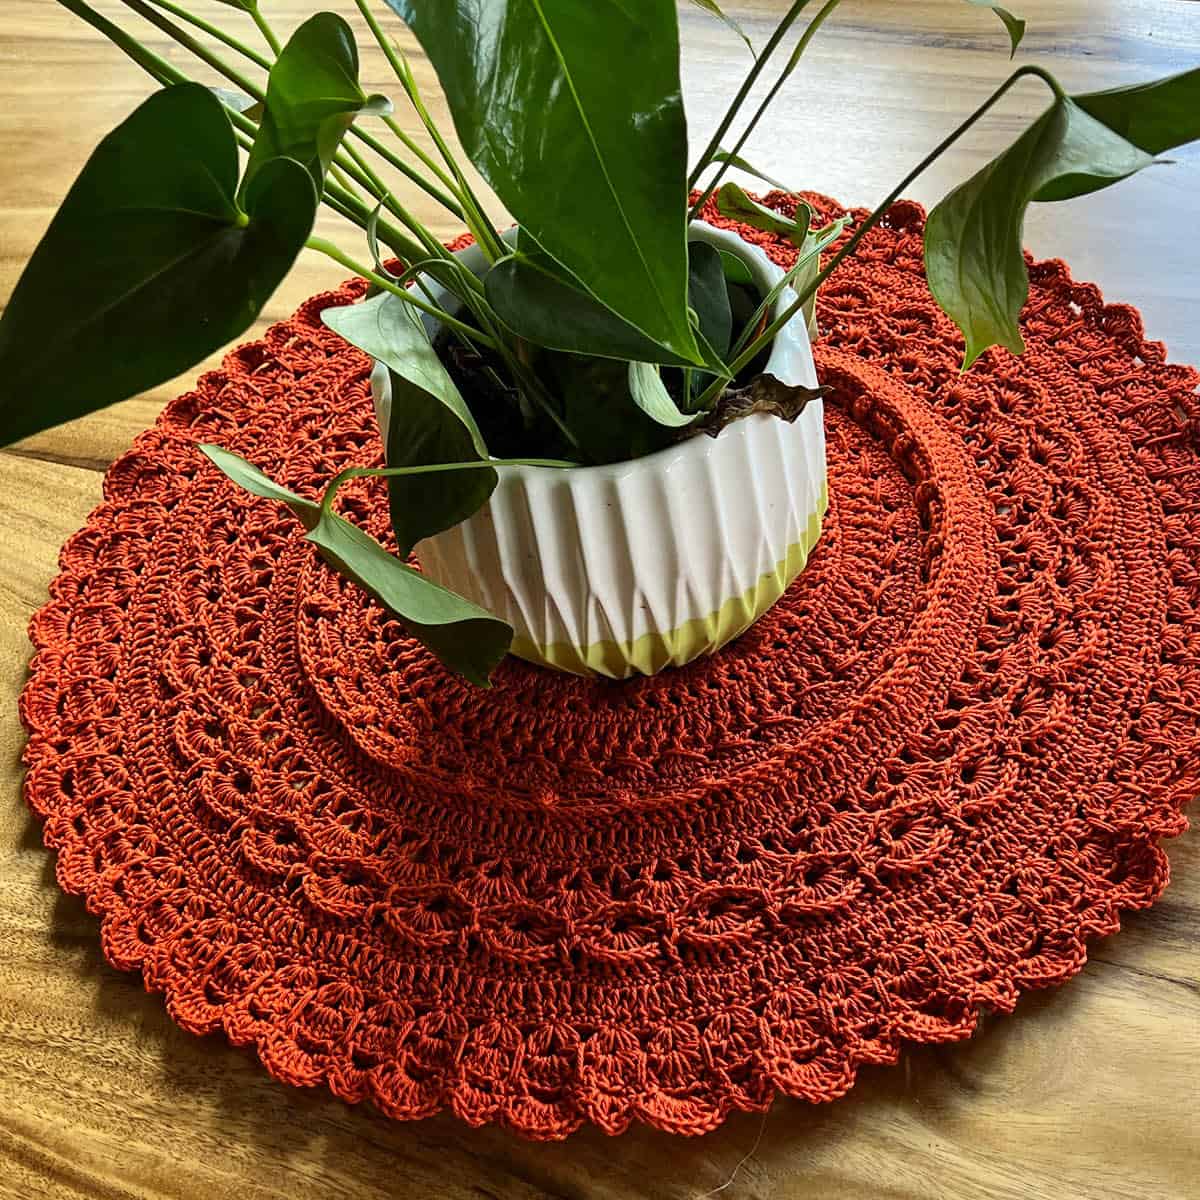 Crochet Study of Rage Doily with Plant